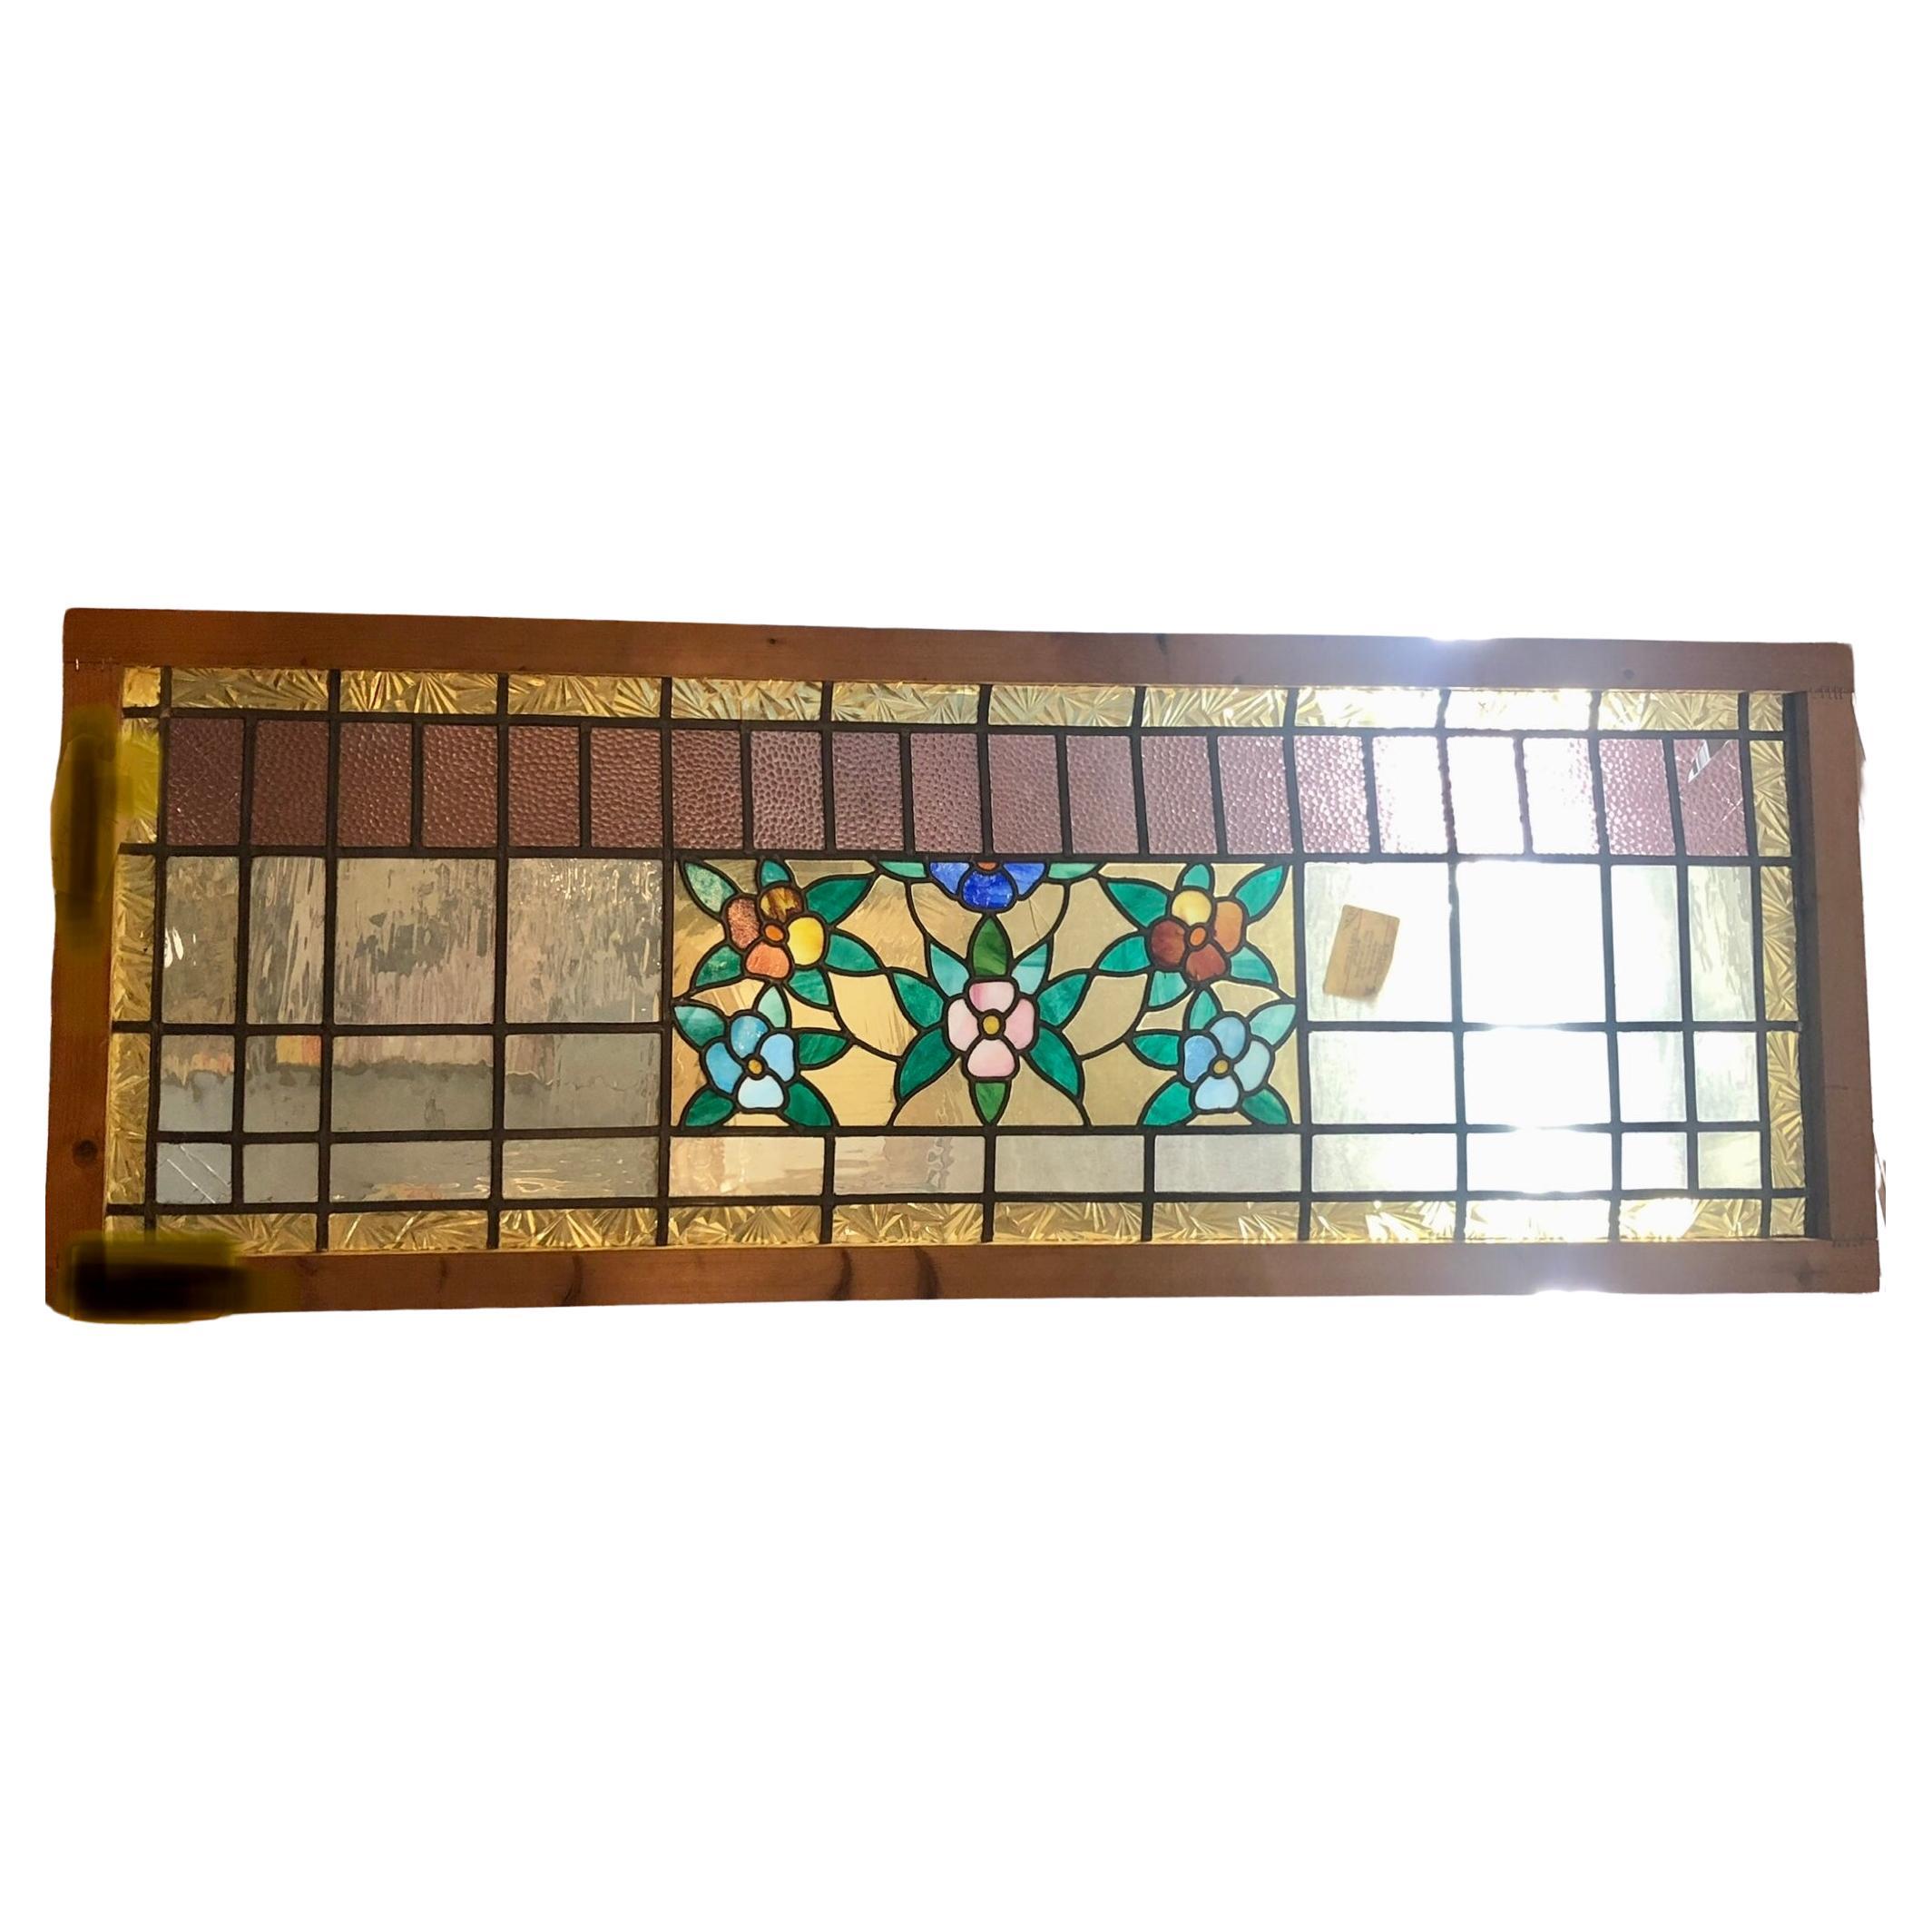 Stained Glass Transom 57"x21.5" For Sale